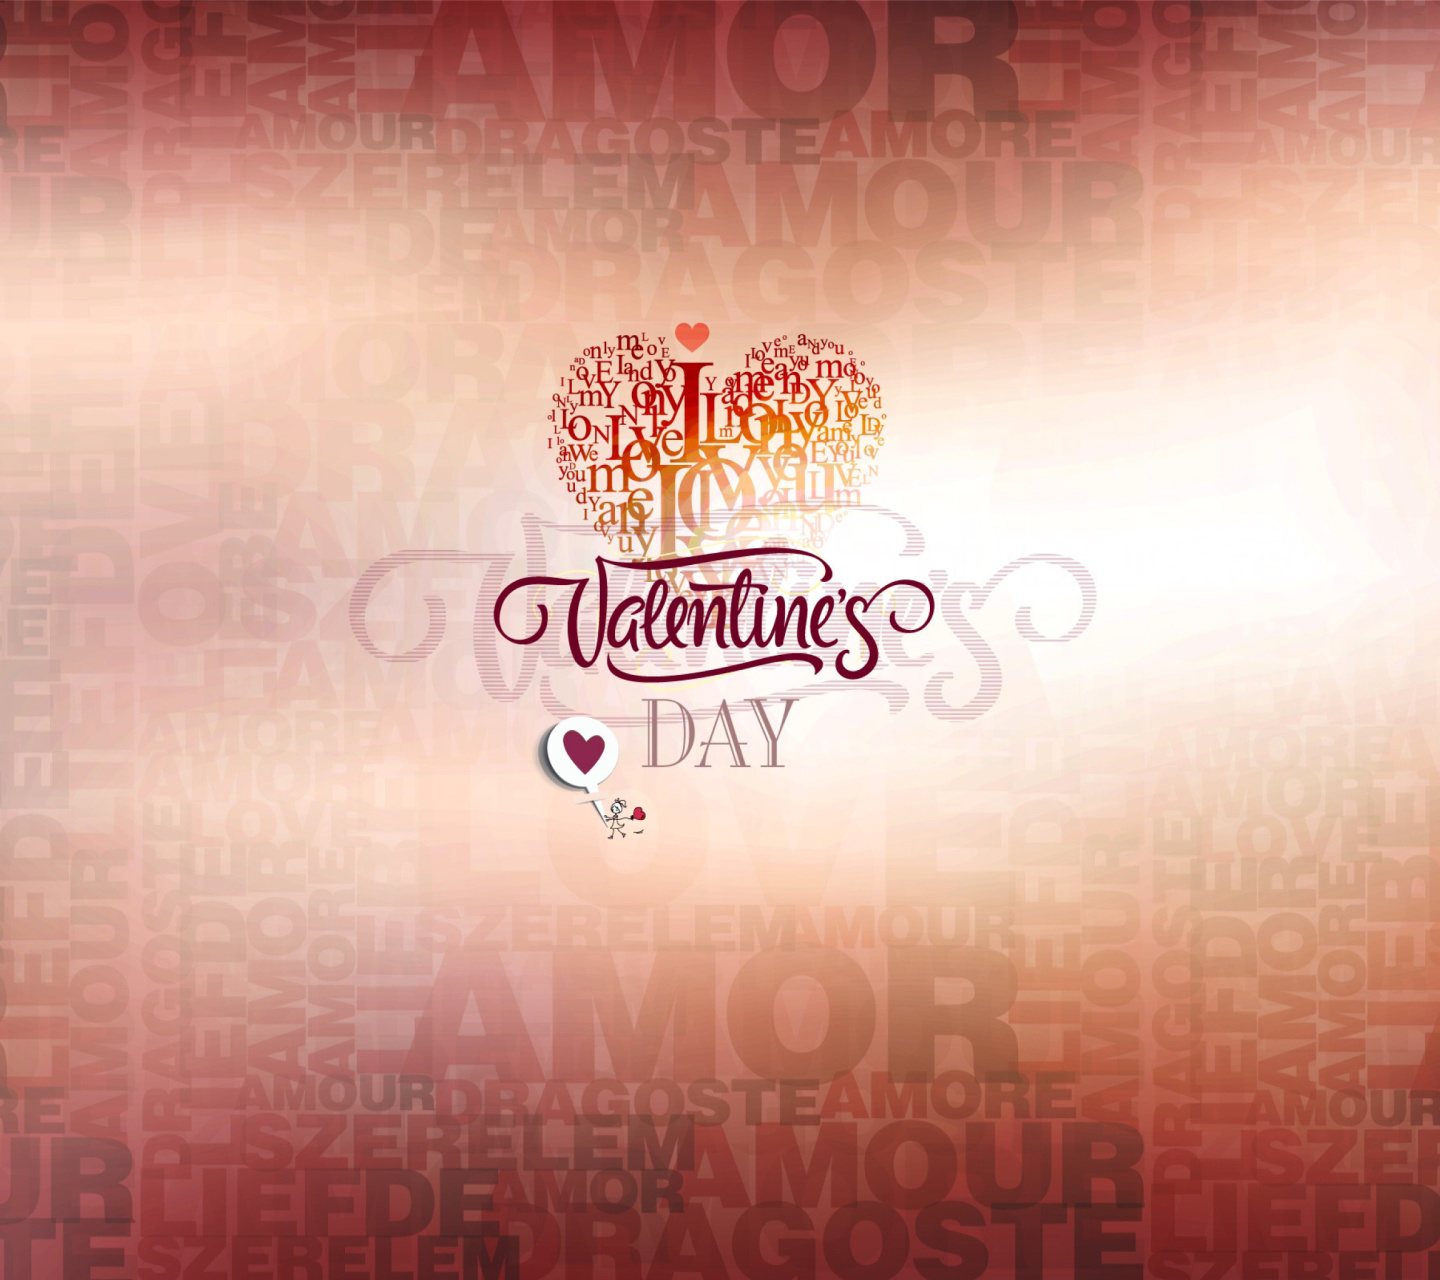 February 14 Valentines Day wallpaper 1440x1280